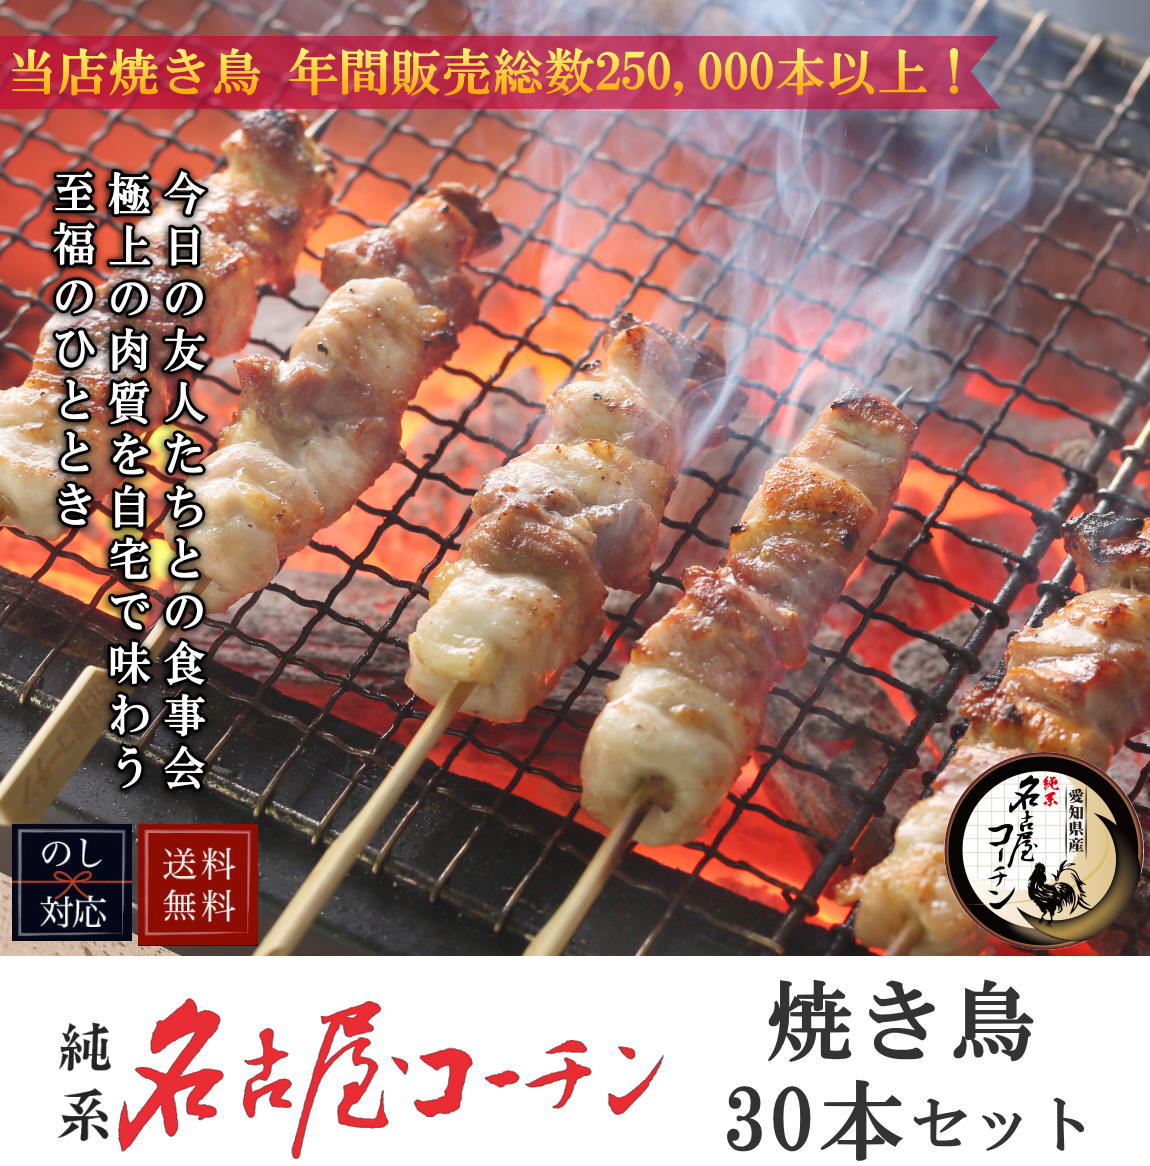  Father's day Bon Festival gift Nagoya Coach n boneless meat with skin .(.. breast .) total 30ps.@ inside festival ..... present inside festival . roasting bird chicken thighs domestic production high class ground chicken roasting bird .. sause 